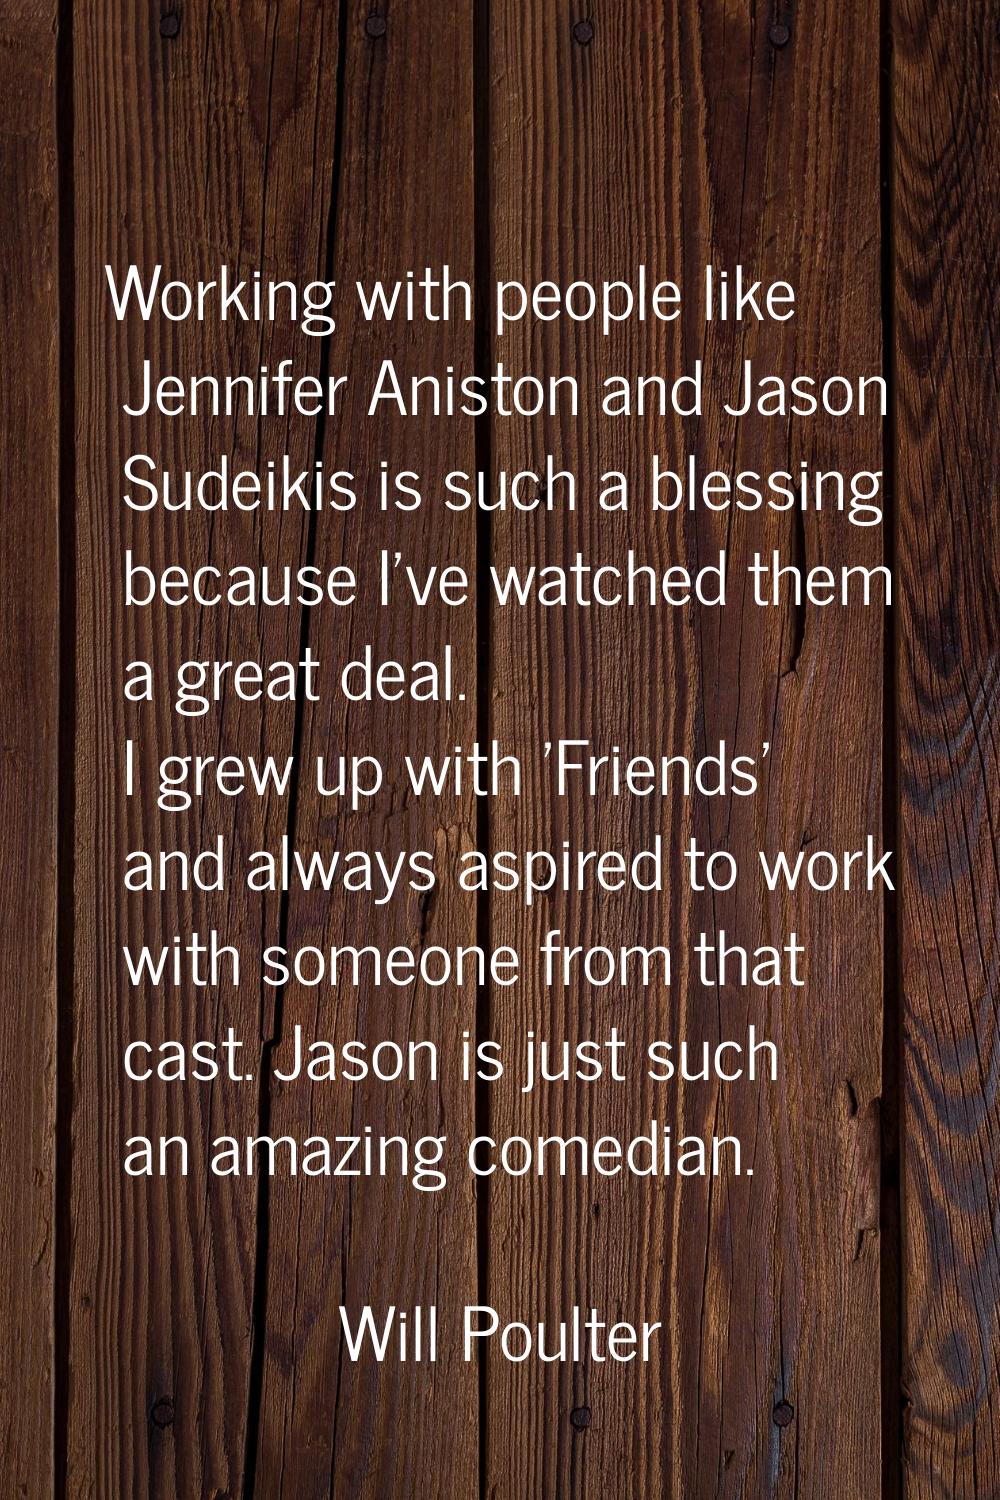 Working with people like Jennifer Aniston and Jason Sudeikis is such a blessing because I've watche